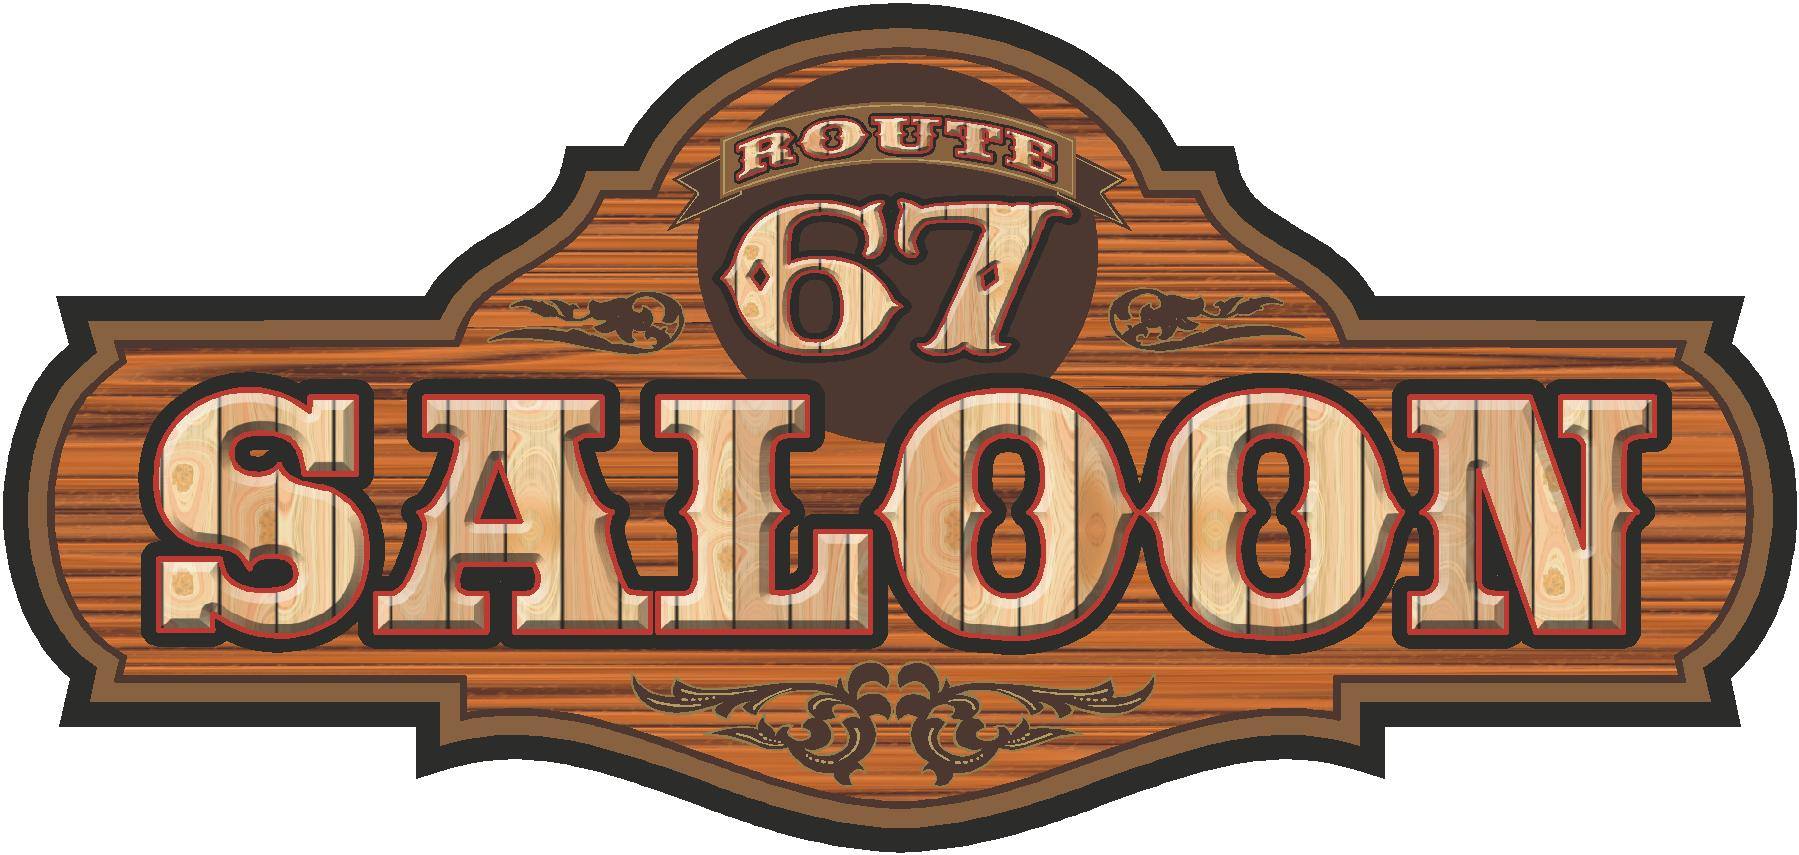 Route 67 Saloon